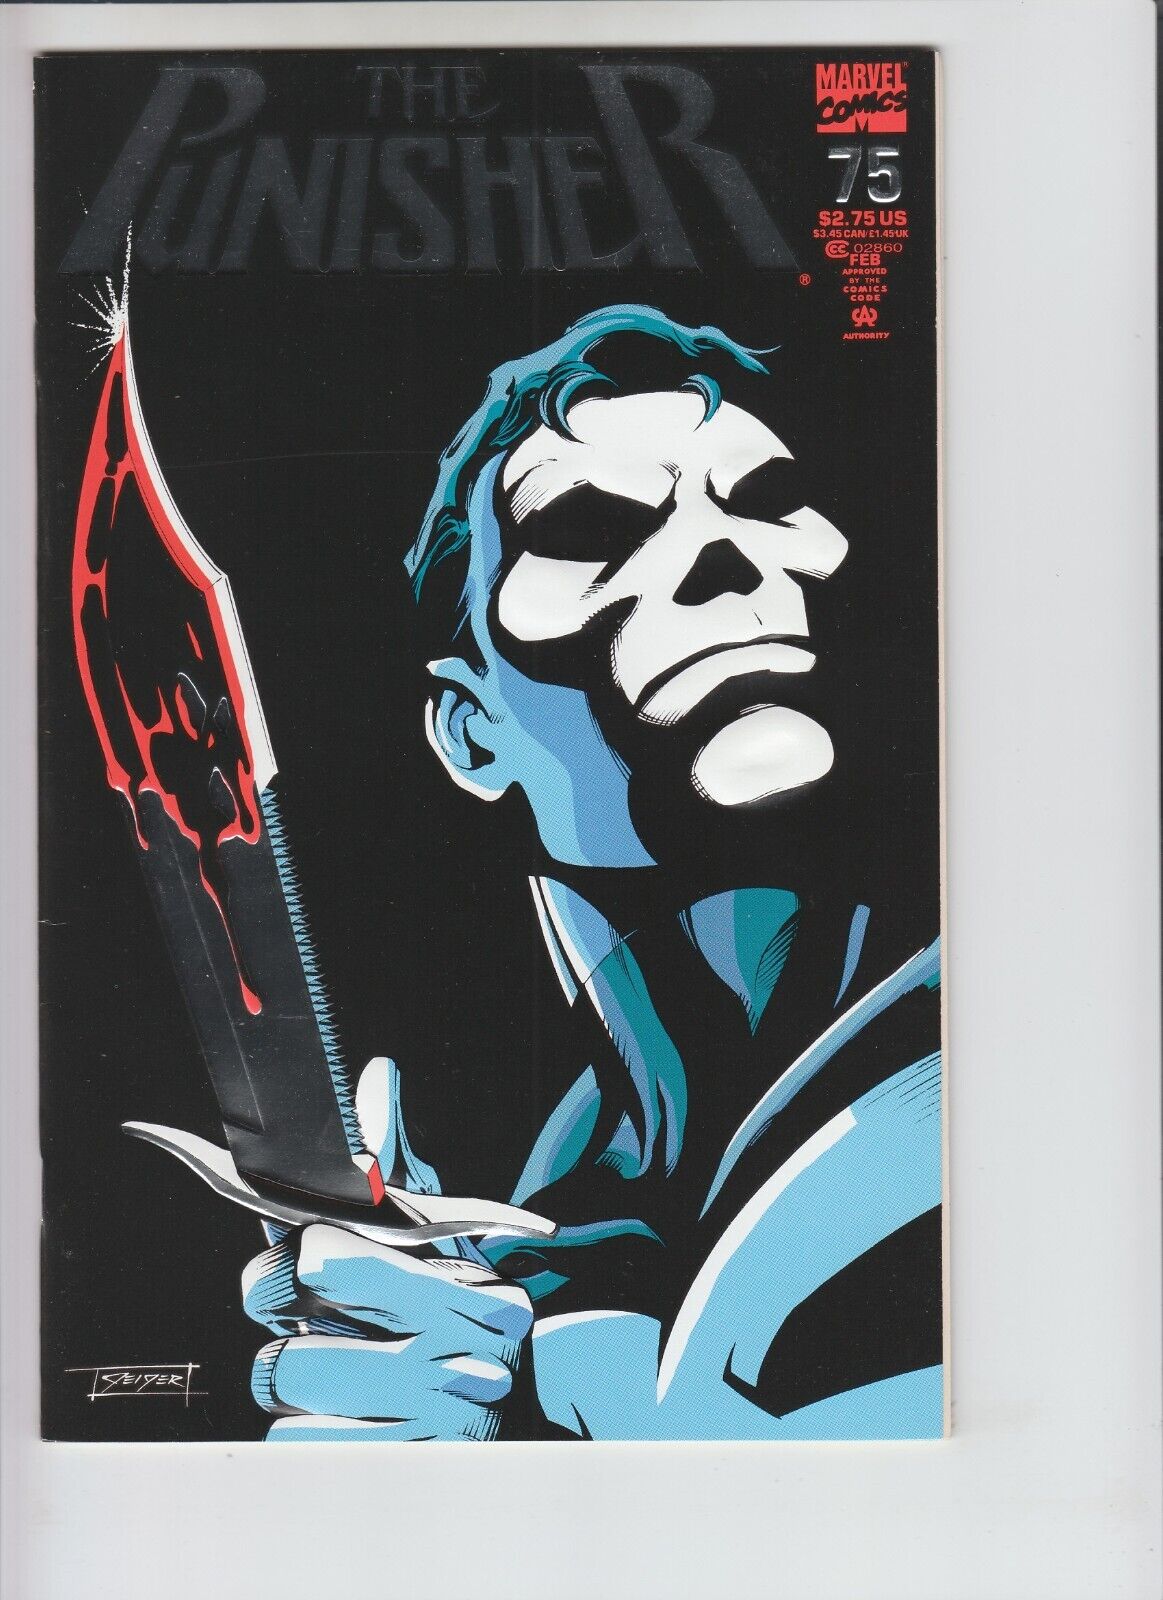 Punisher, The (2nd Series) #75 FN; Marvel | Silver Foil Embossed Cover - we comb